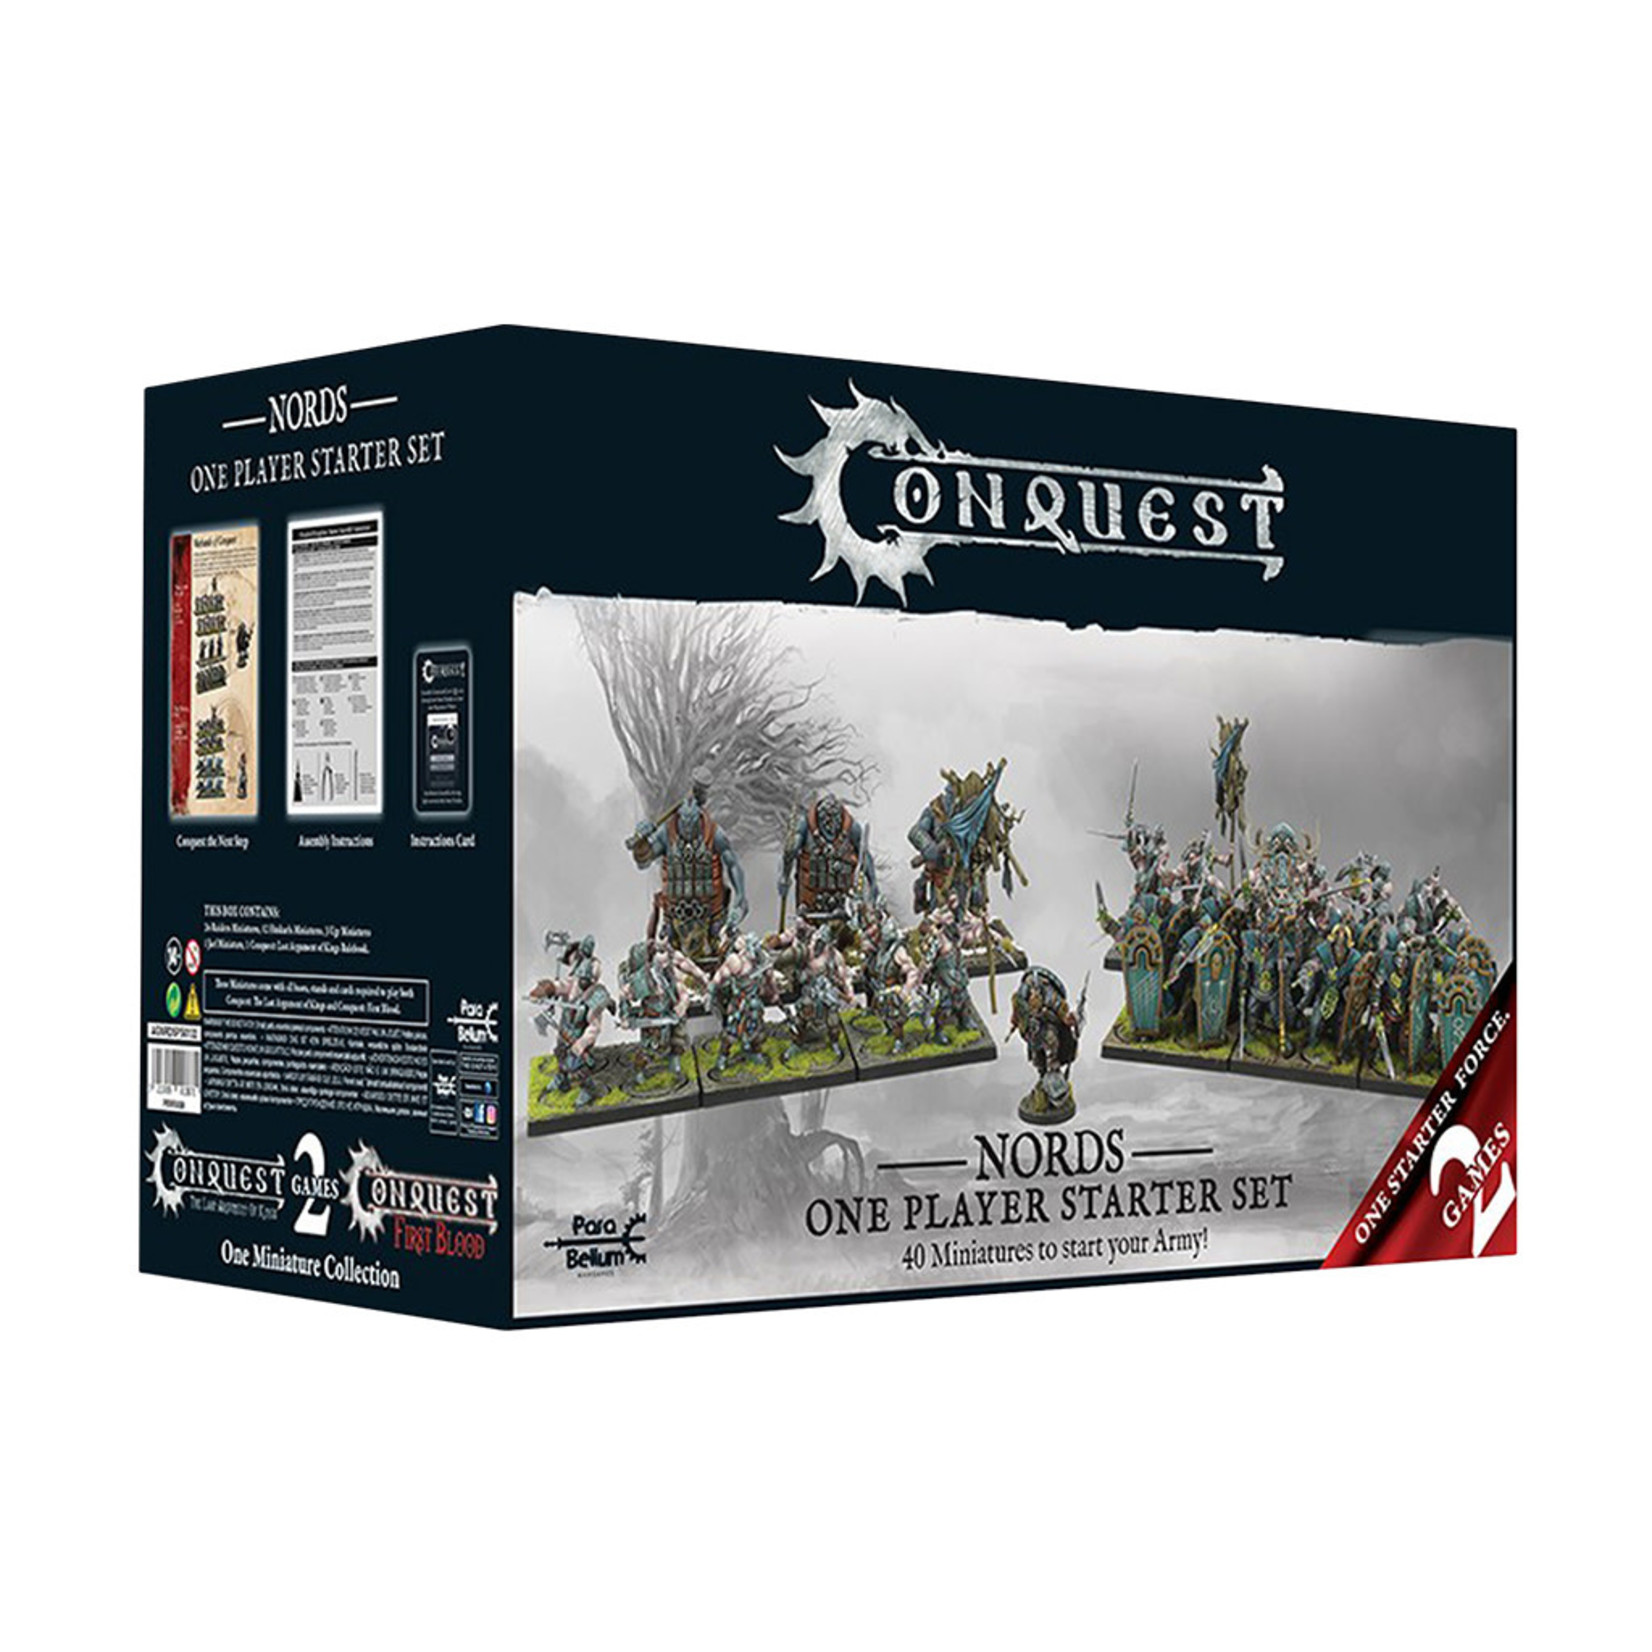 Conquest Nords: Conquest 1 player Starter Set